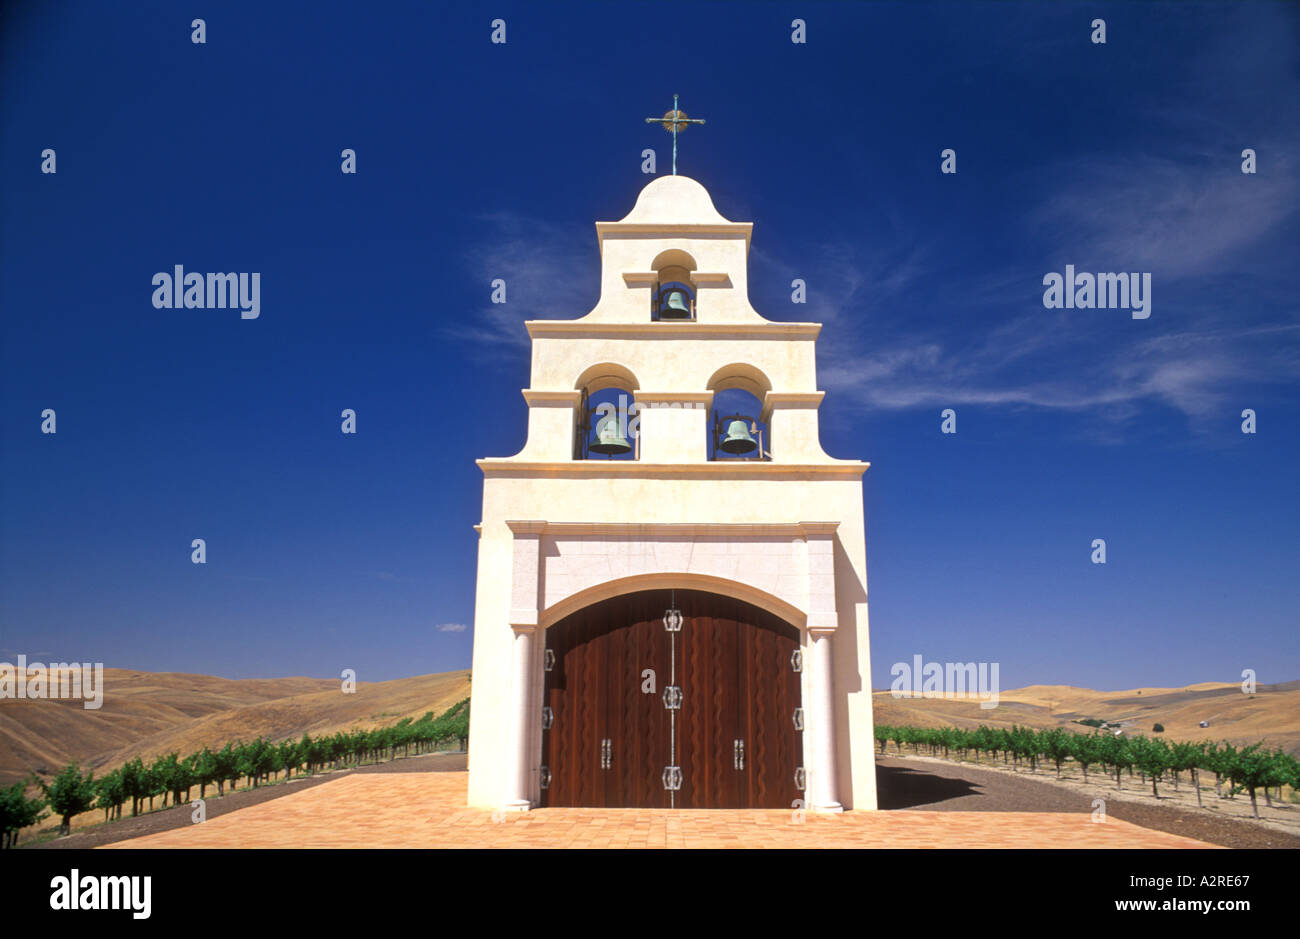 USA, California, Paso Robles, Spanish Mission style church on hill with grape vineyard Stock Photo